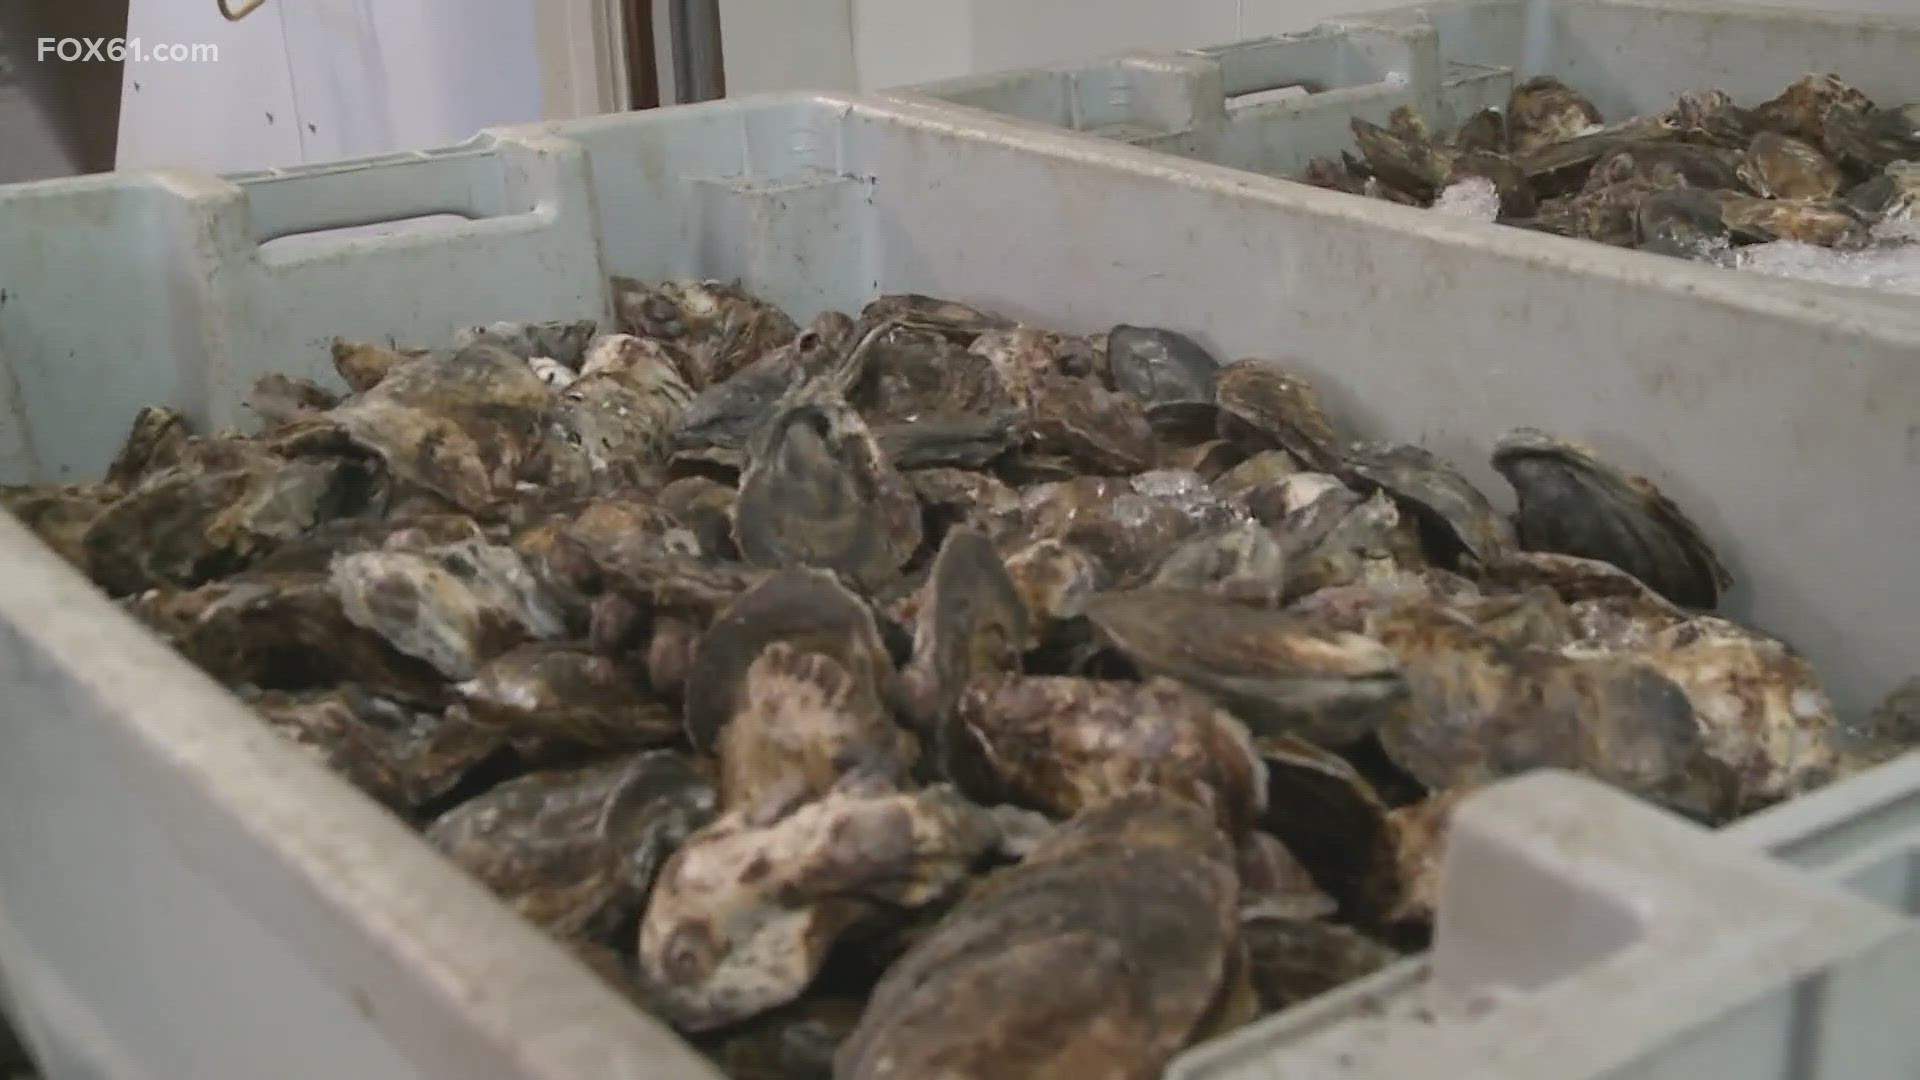 Recently, 2 deaths in Connecticut have been reported to be linked to a deadly bacteria found inside oysters.